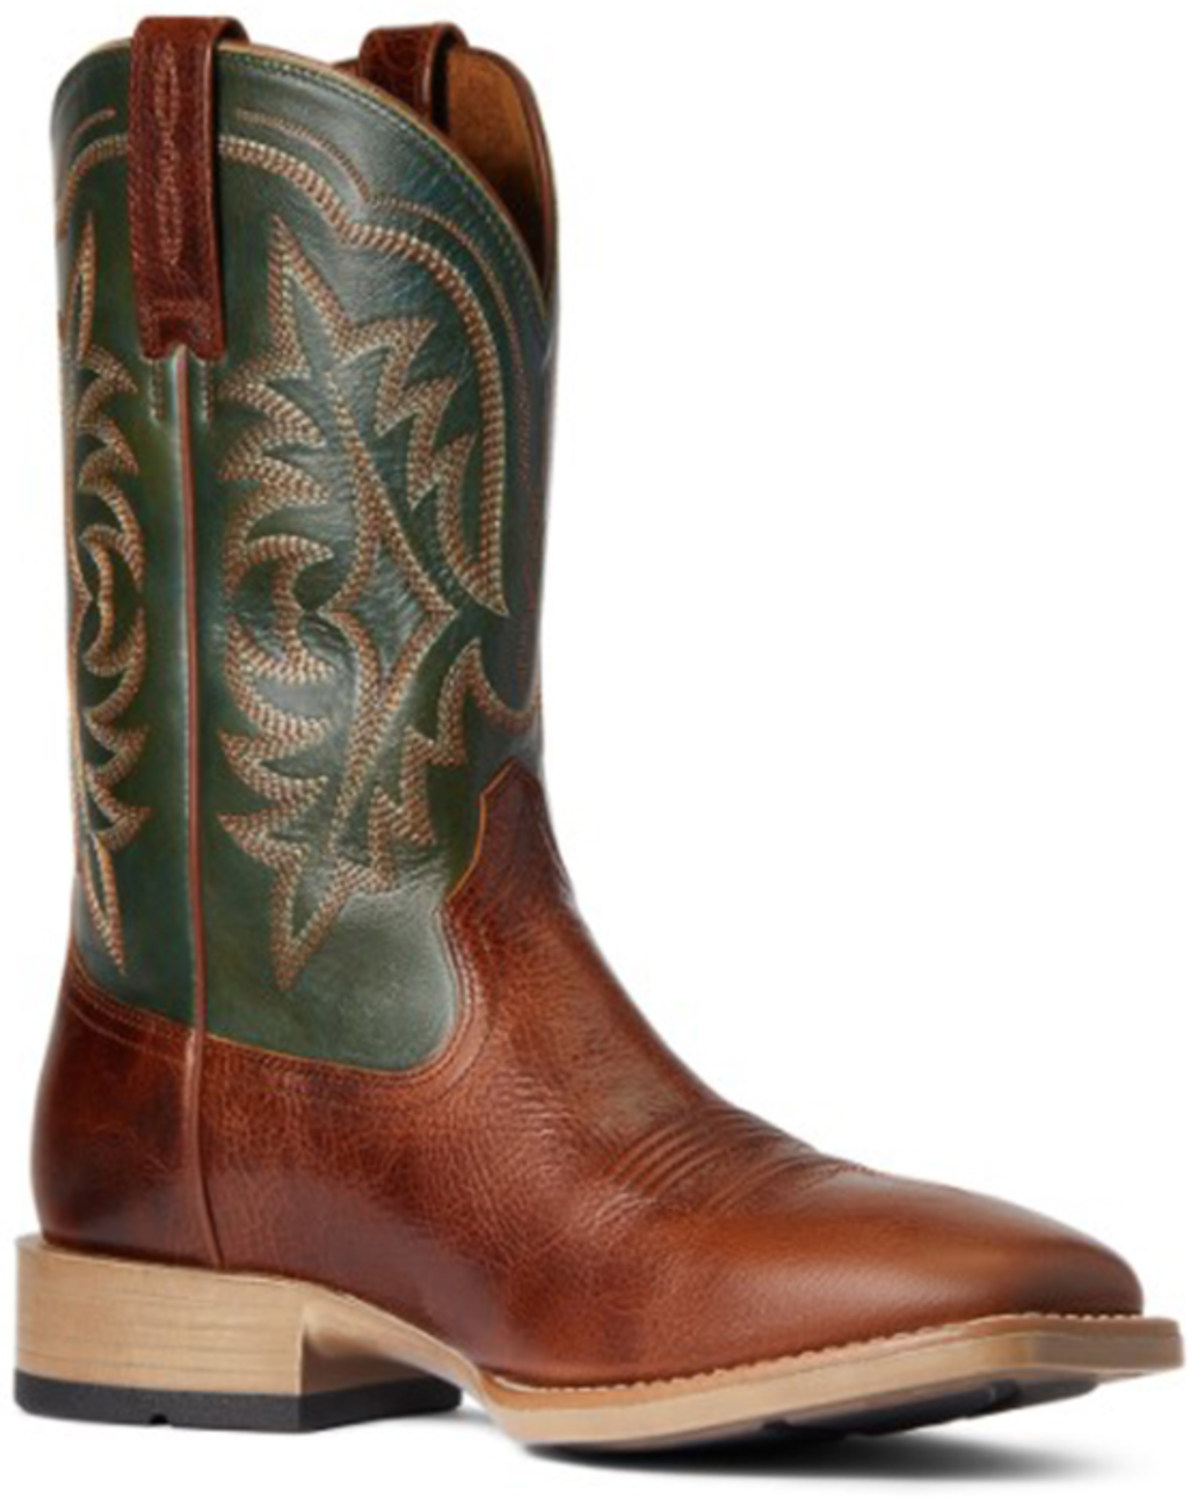 Ariat Men's Ryden Ultra Western Performance Boots - Broad Square Toe